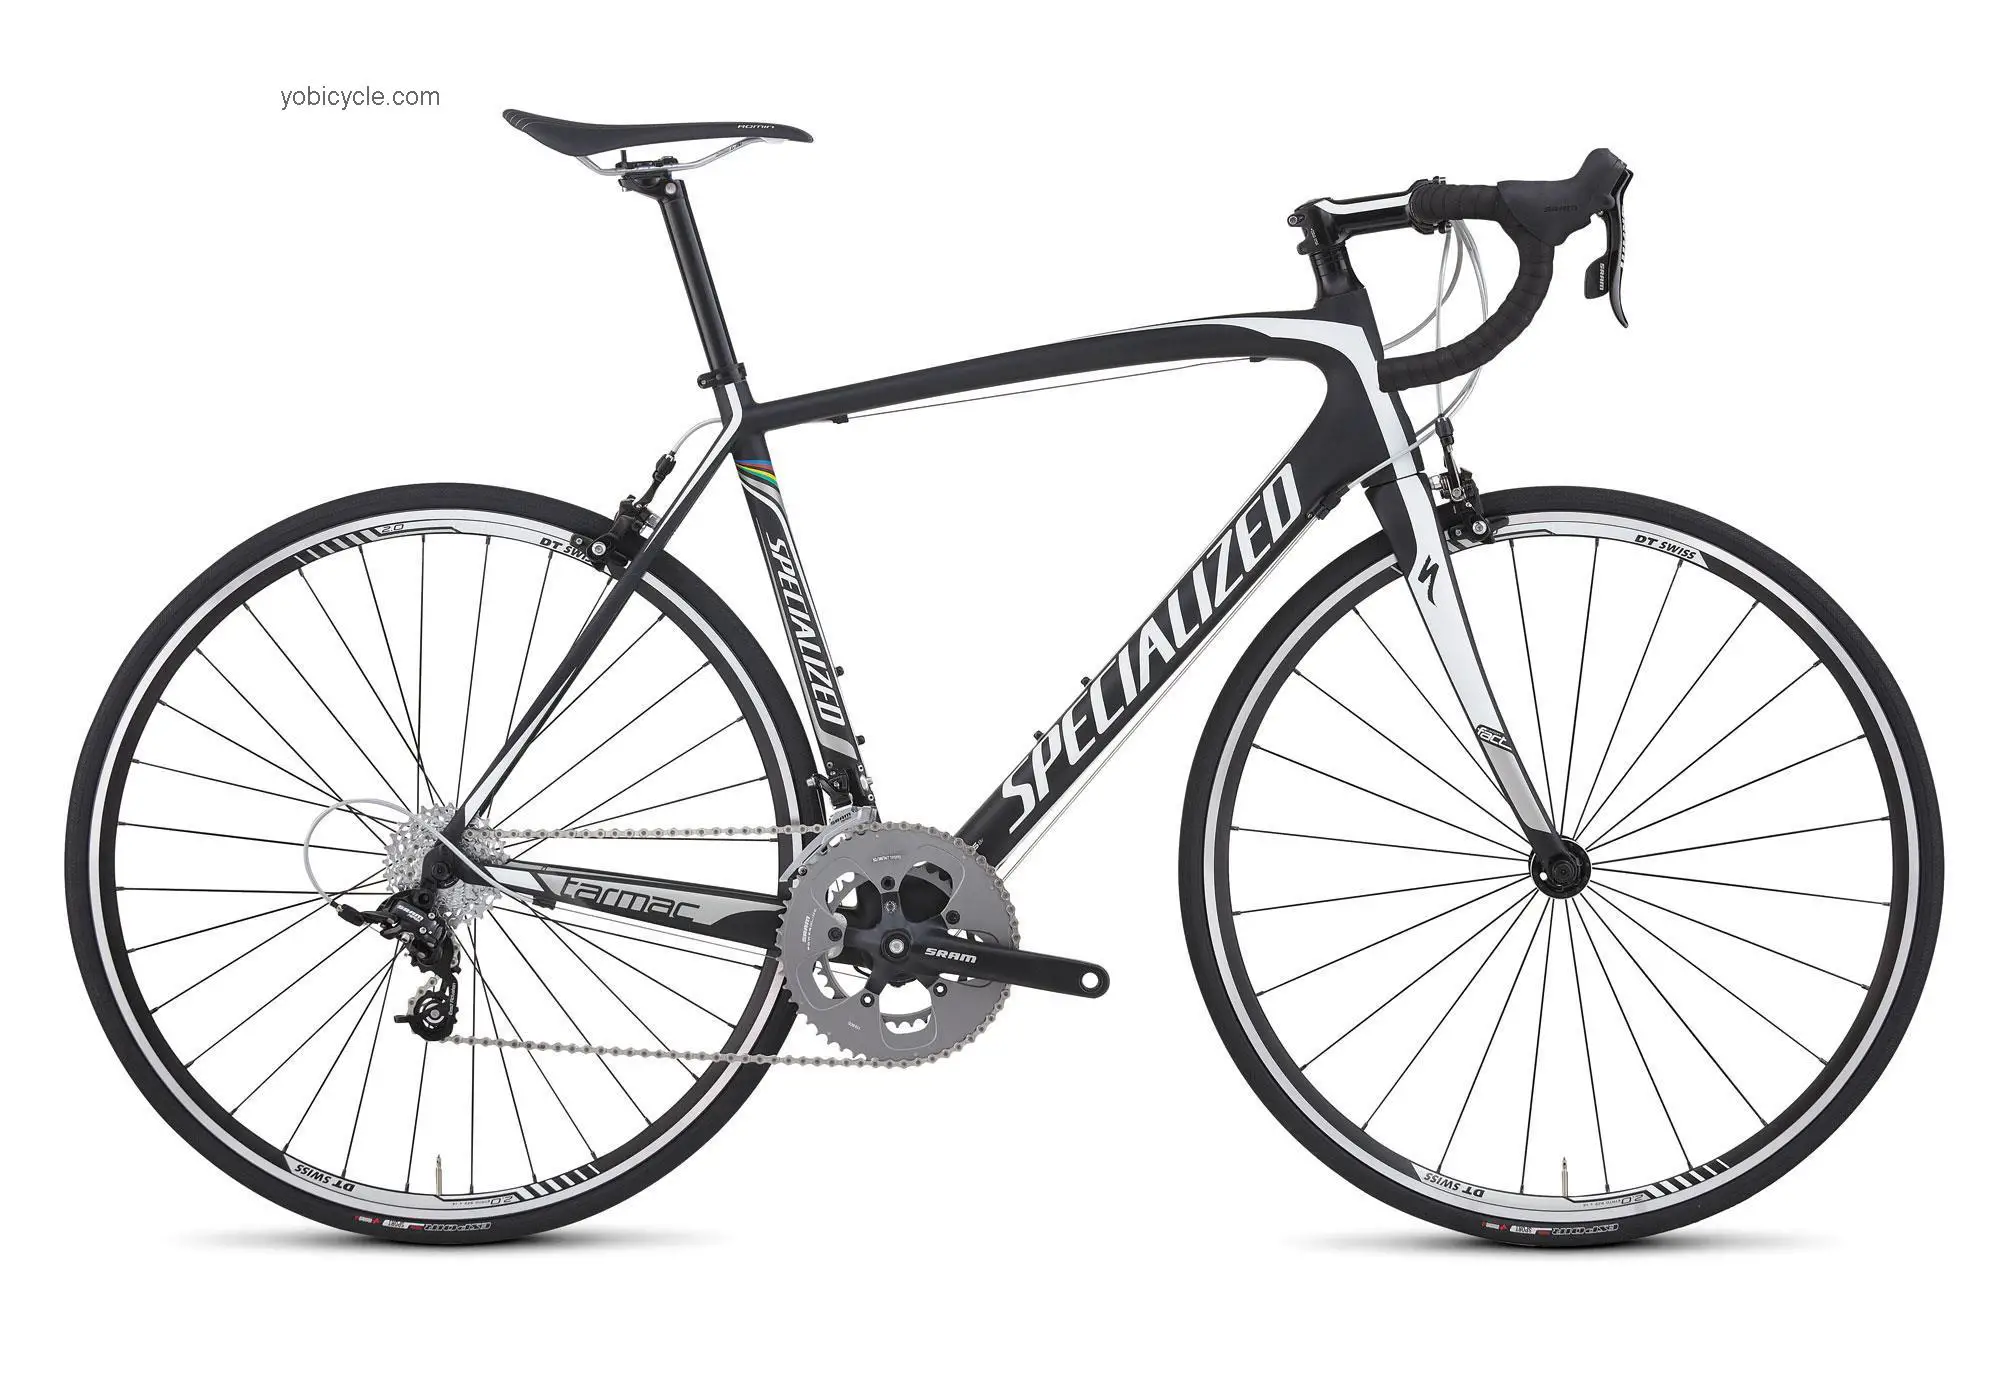 Specialized Tarmac Apex M2 2012 comparison online with competitors